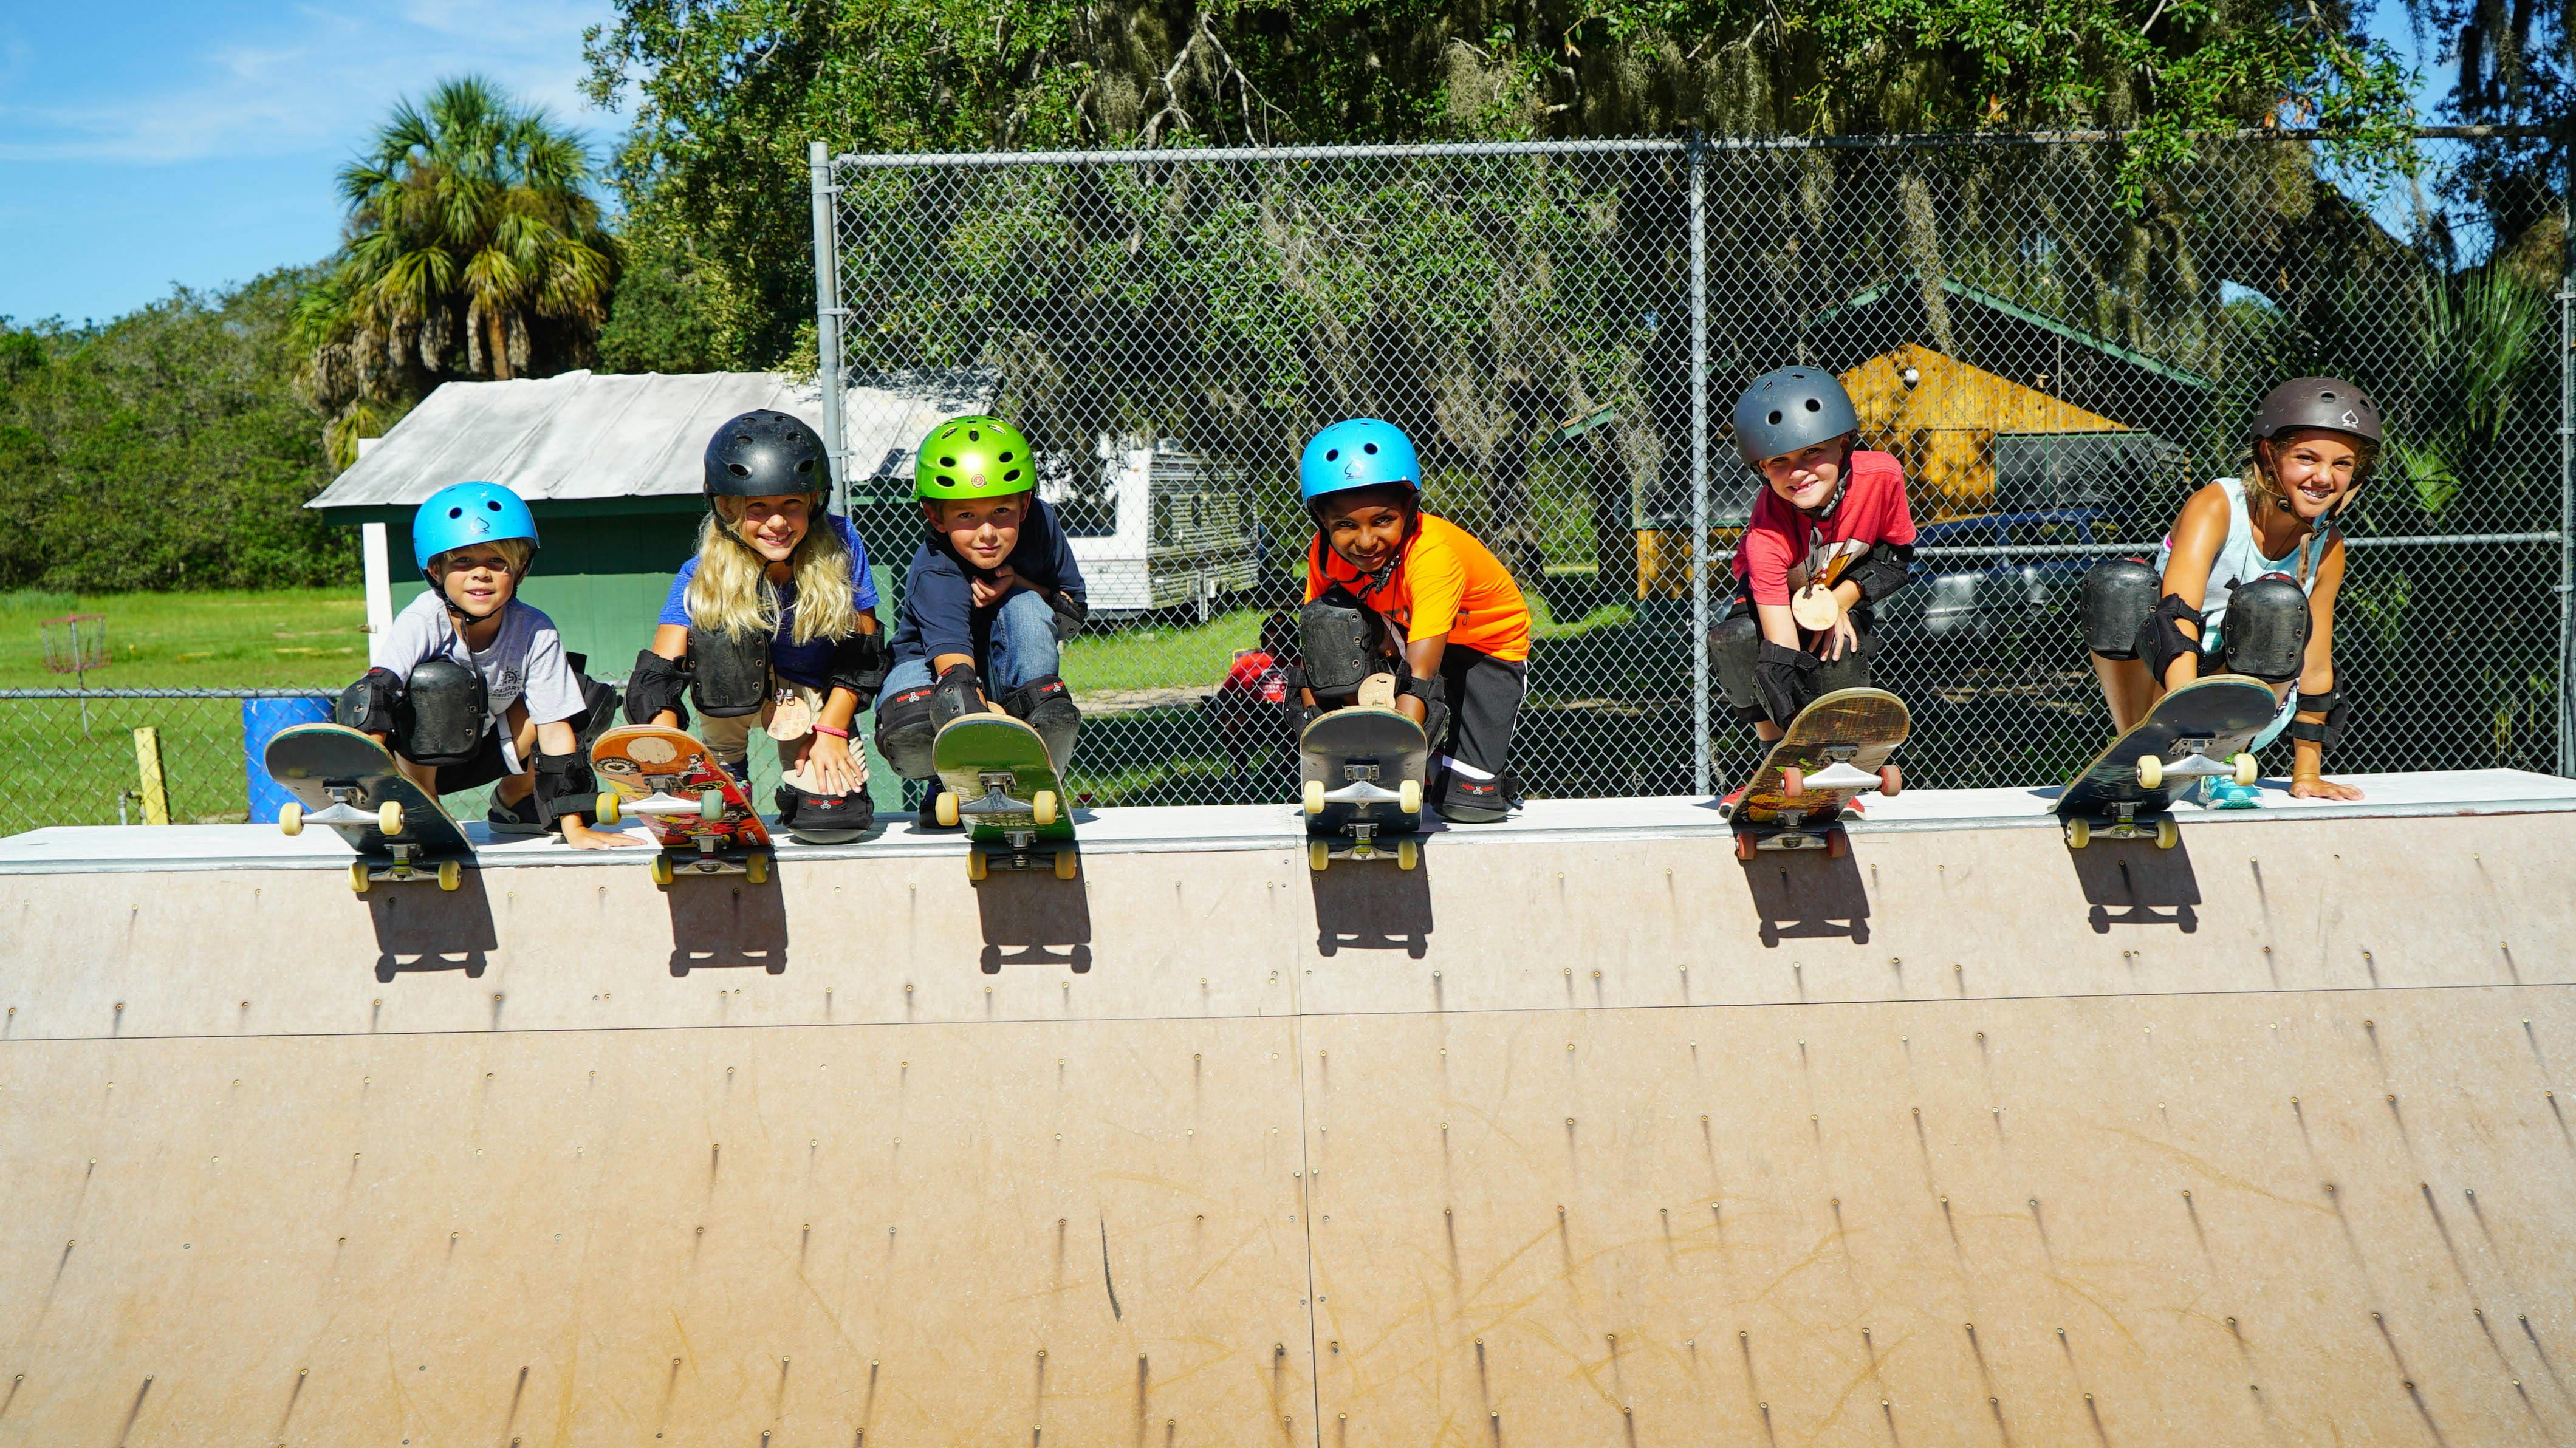 The Coolest Skateboard Camp in Florida